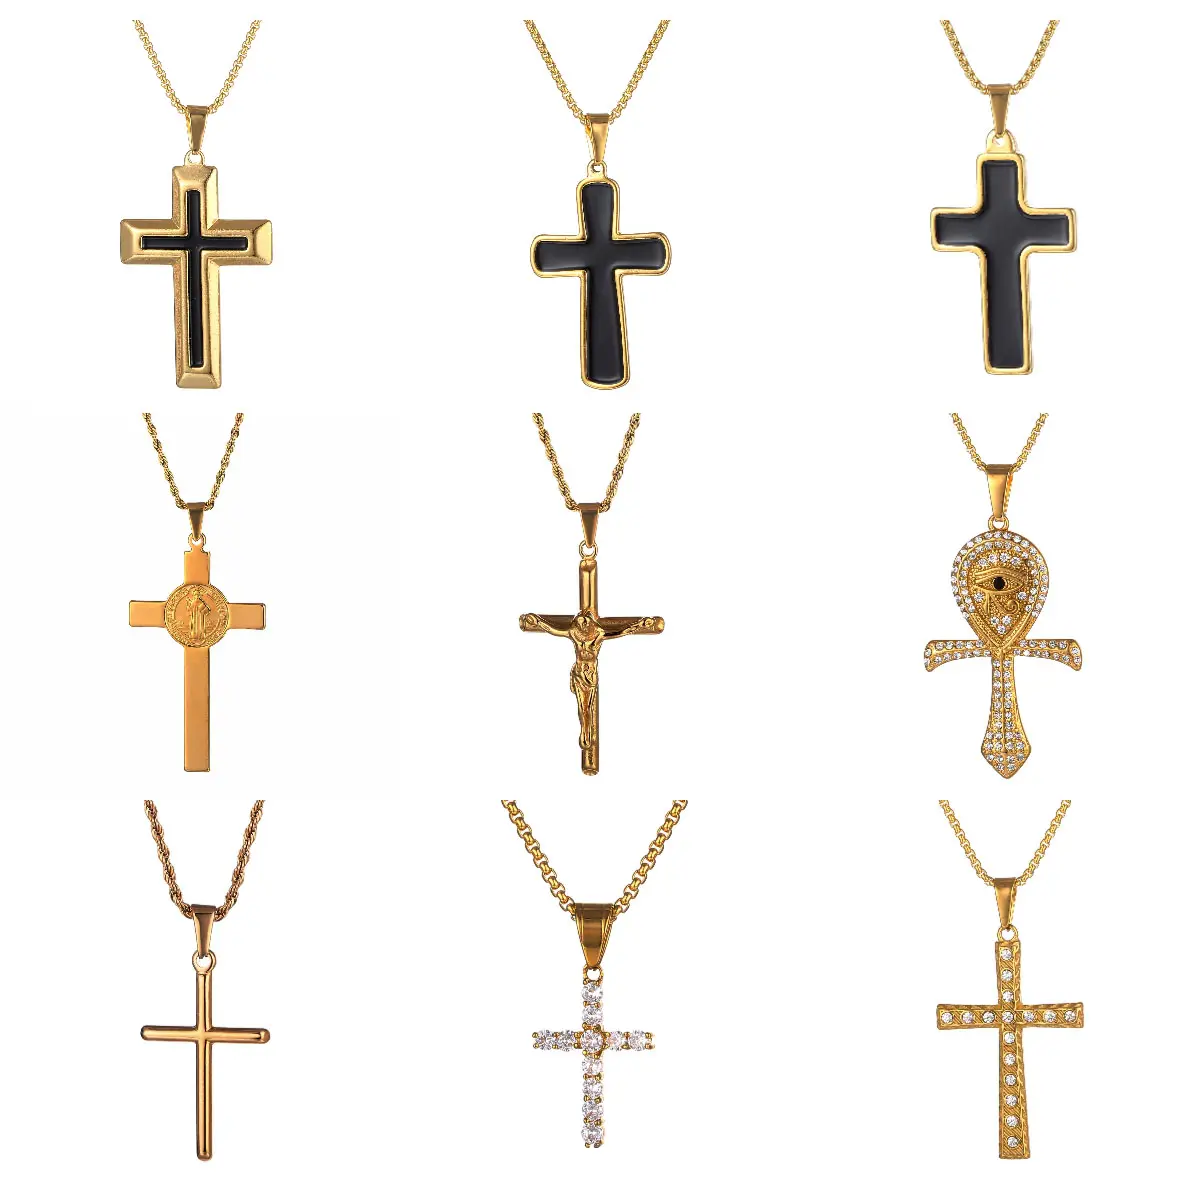 Custom Bling Diamond Zirconia Cross Pendant Necklace For Men 18k Gold Plated Stainless Steel Cz Crystal Crucifix Cross Necklace